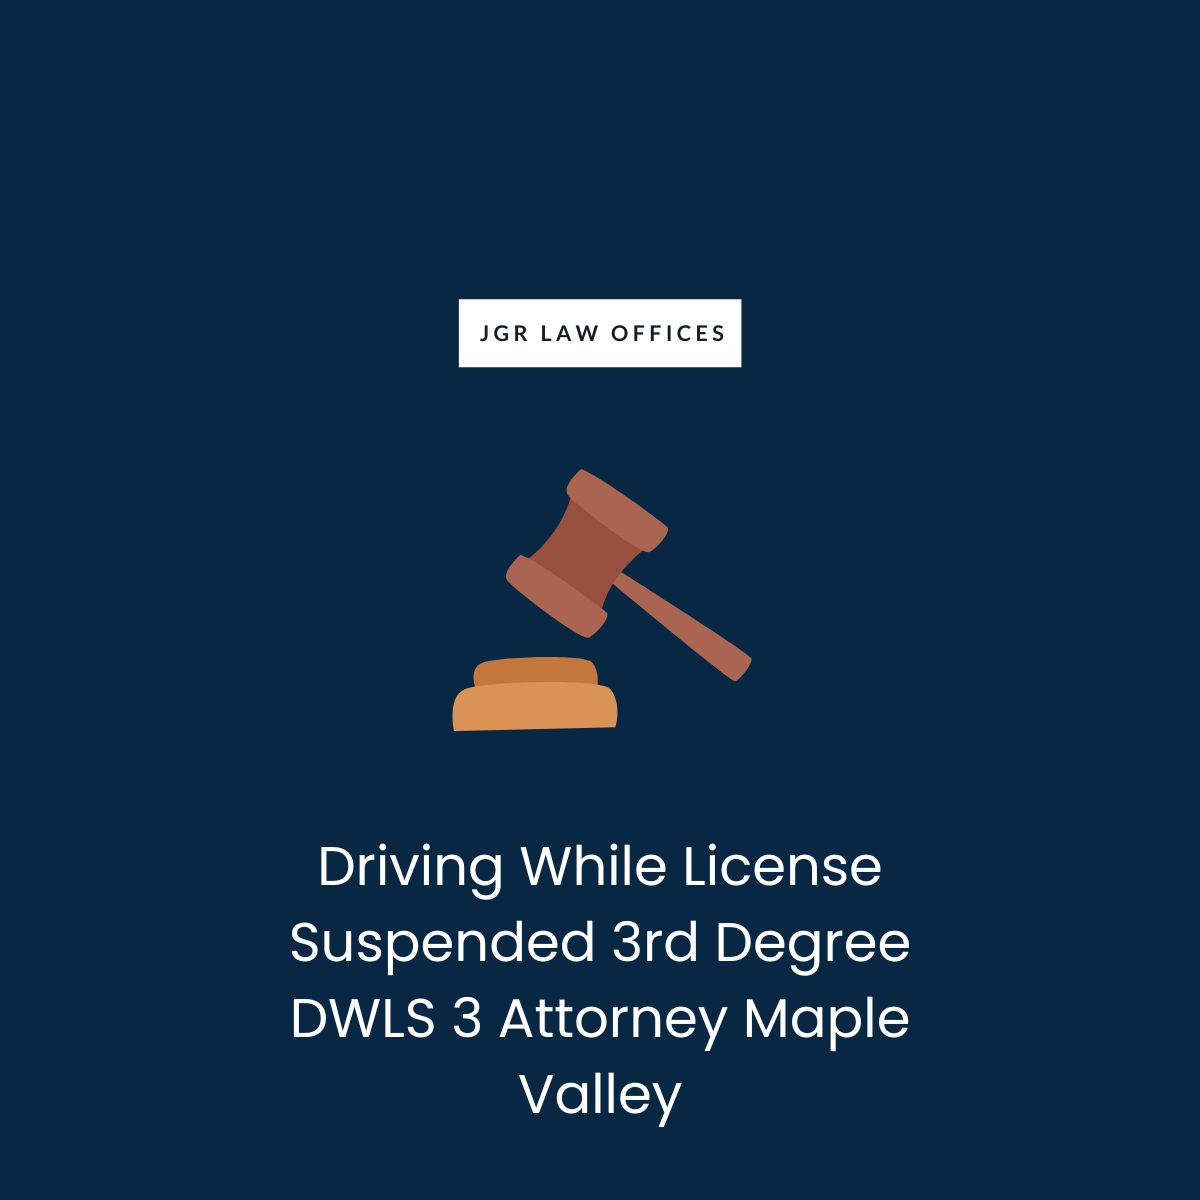 Driving While License Suspended 3rd Degree DWLS 3 Lawyer Maple Valley Driving While License Suspended 3rd Degree DWLS 3